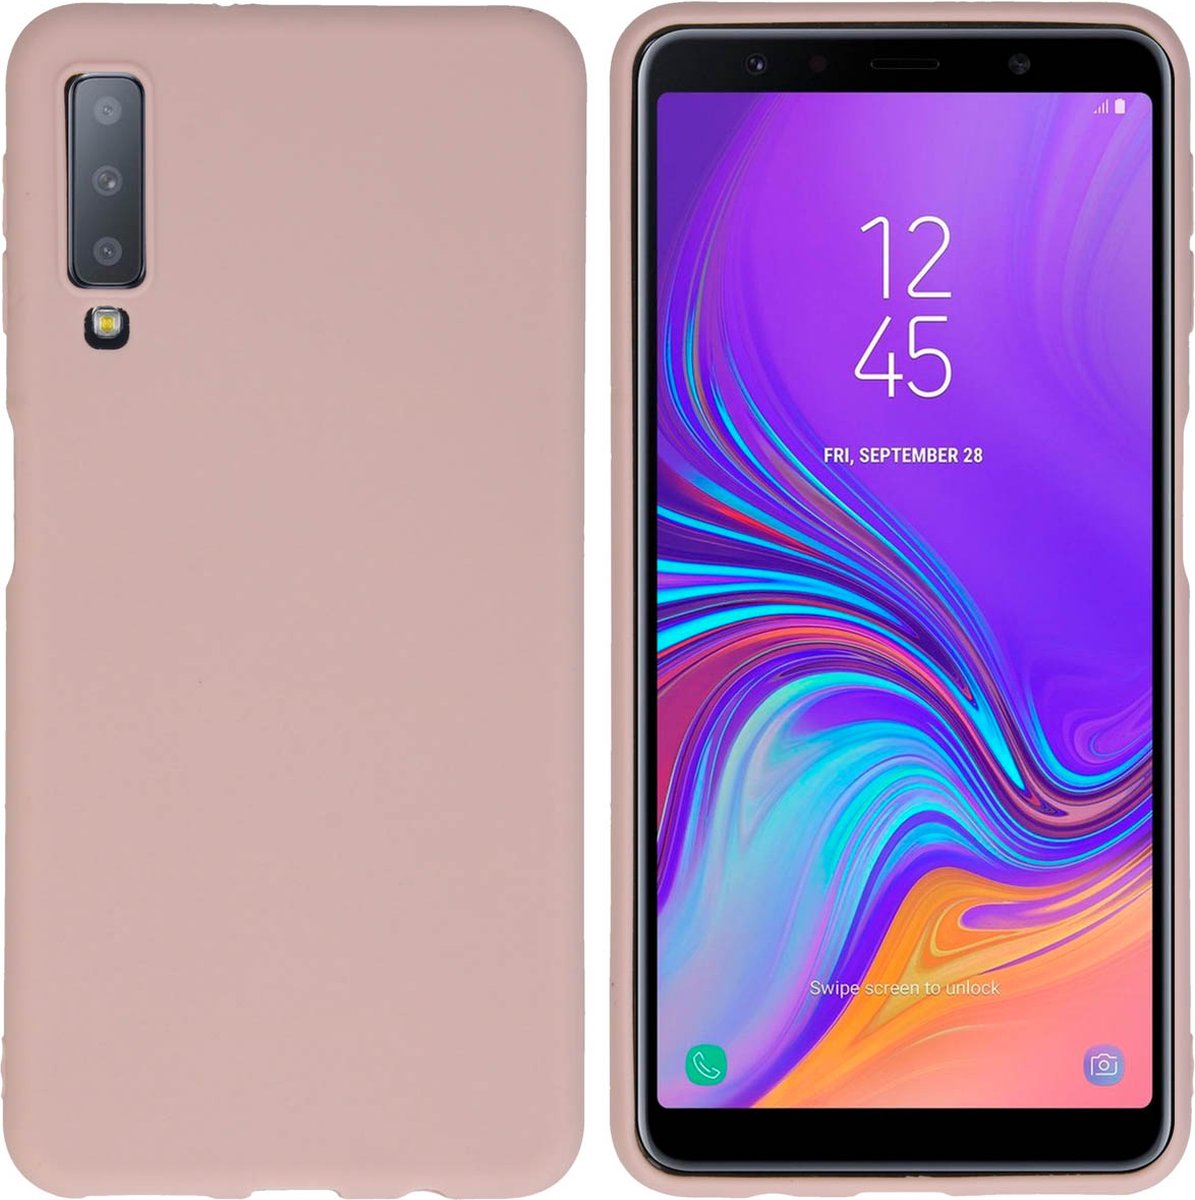 iMoshion Color Backcover Samsung Galaxy A7 (2018) hoesje - lichtroze